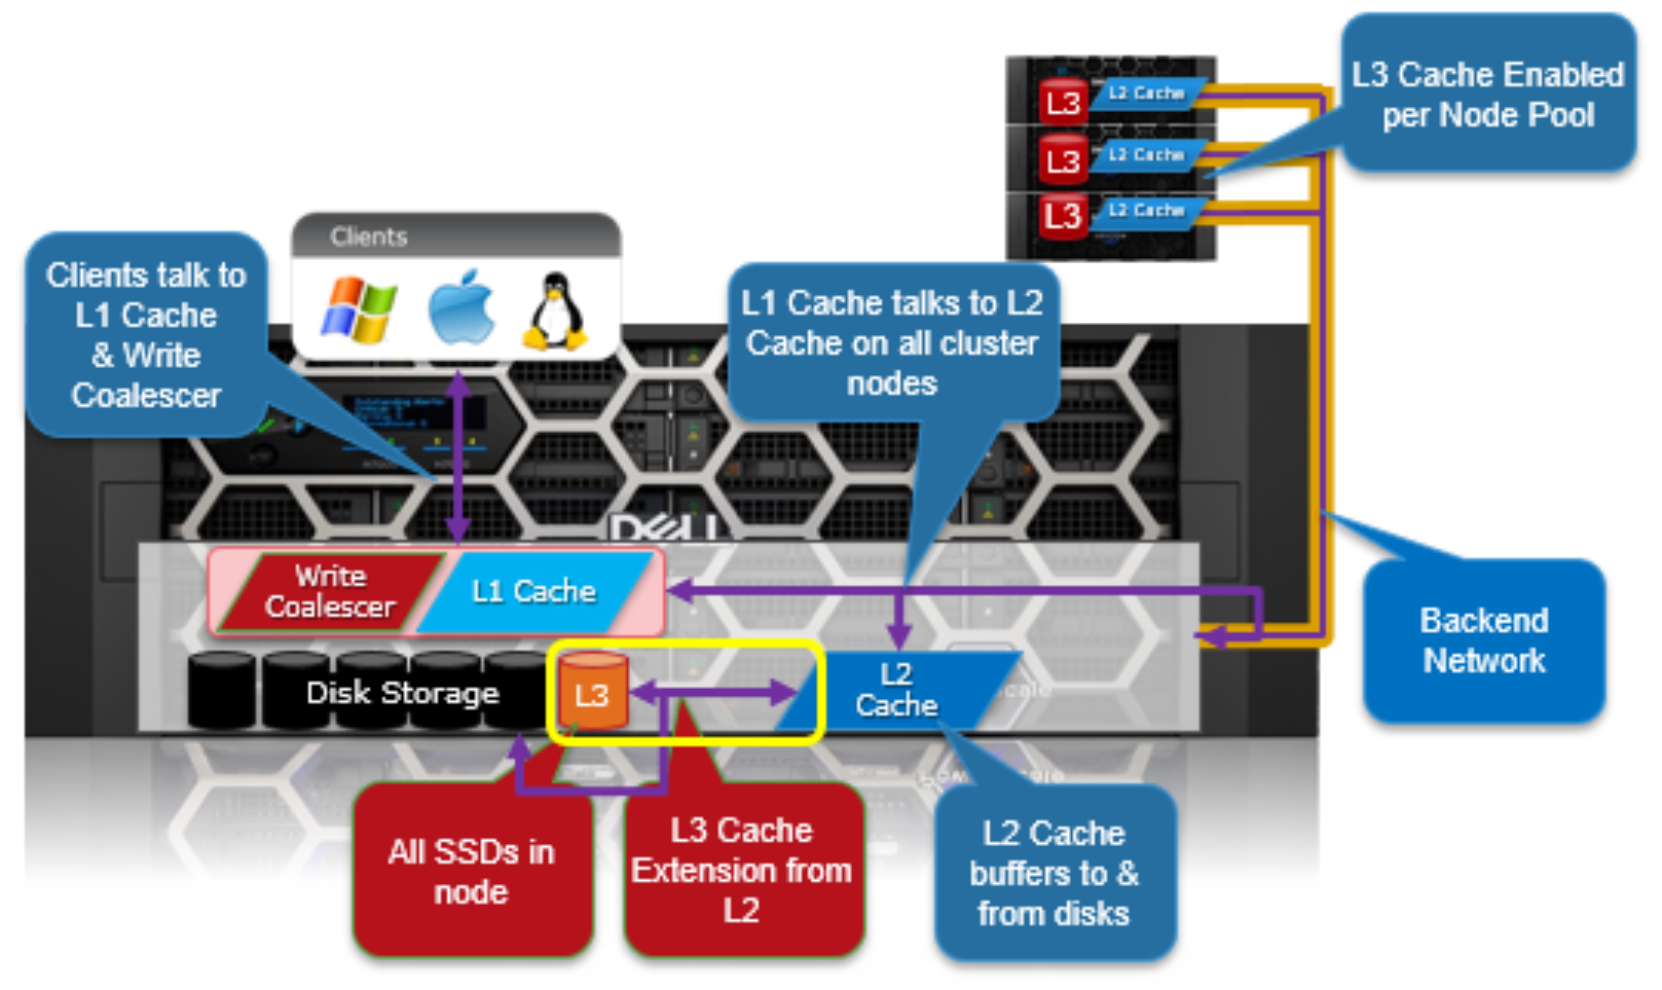 Graphic depicting the operation of the OneFS L1, L2, and L3 caching architecture.